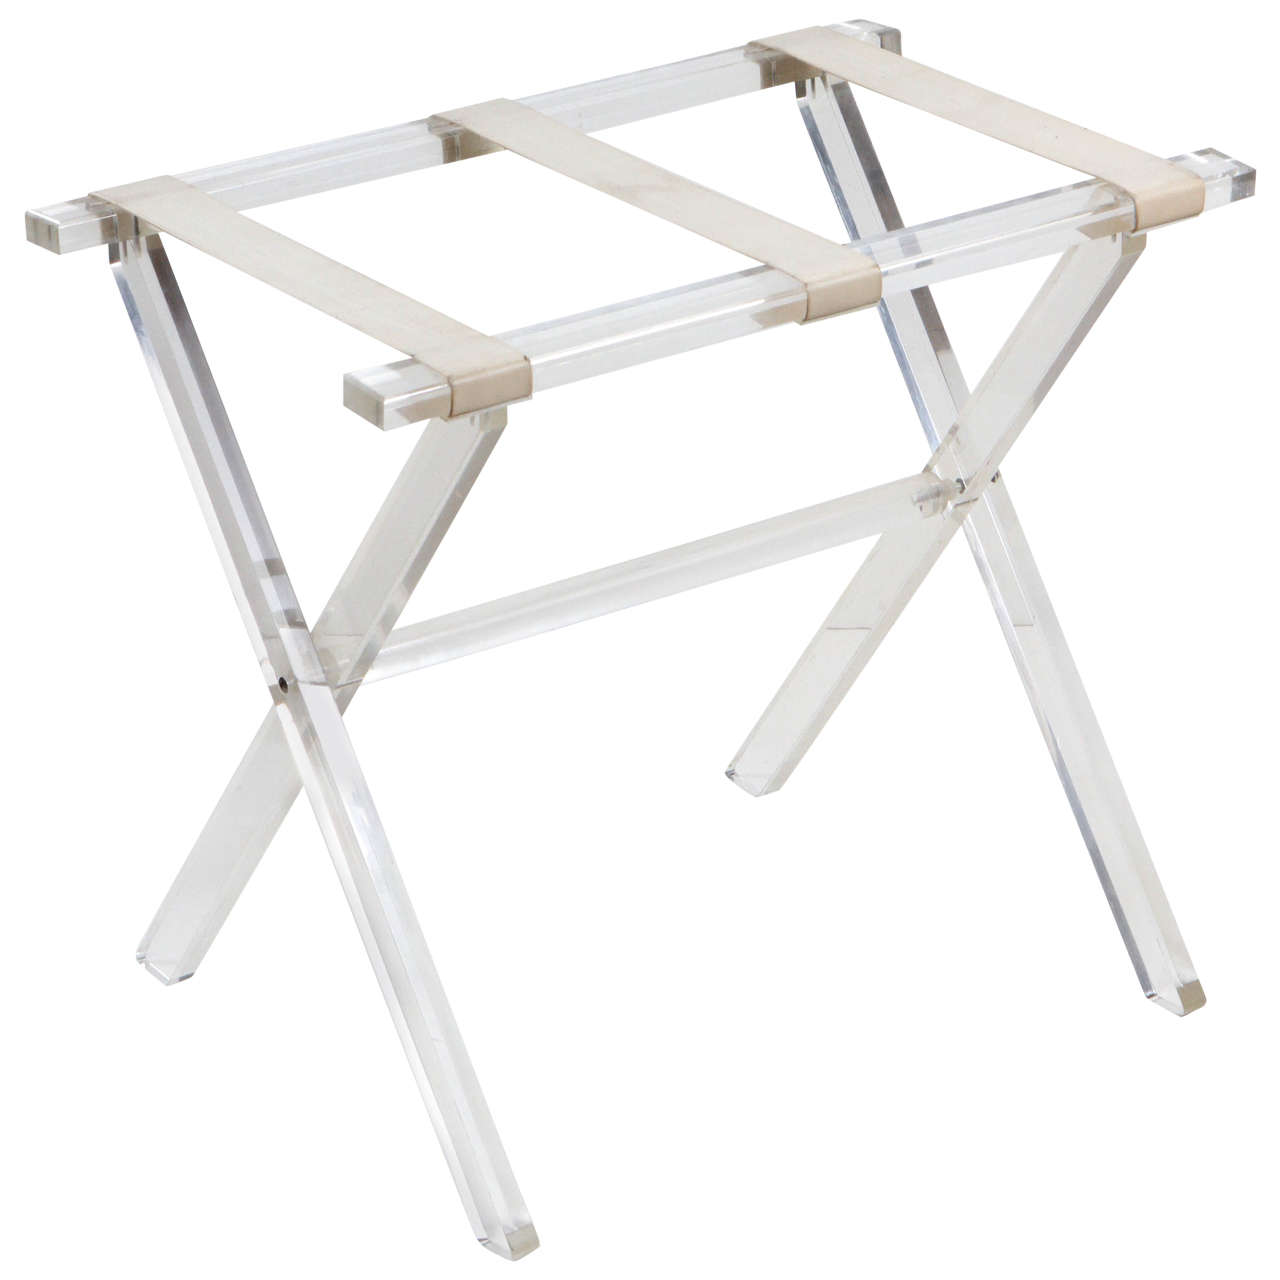 Folding Lucite Luggage Rack by Scheibe